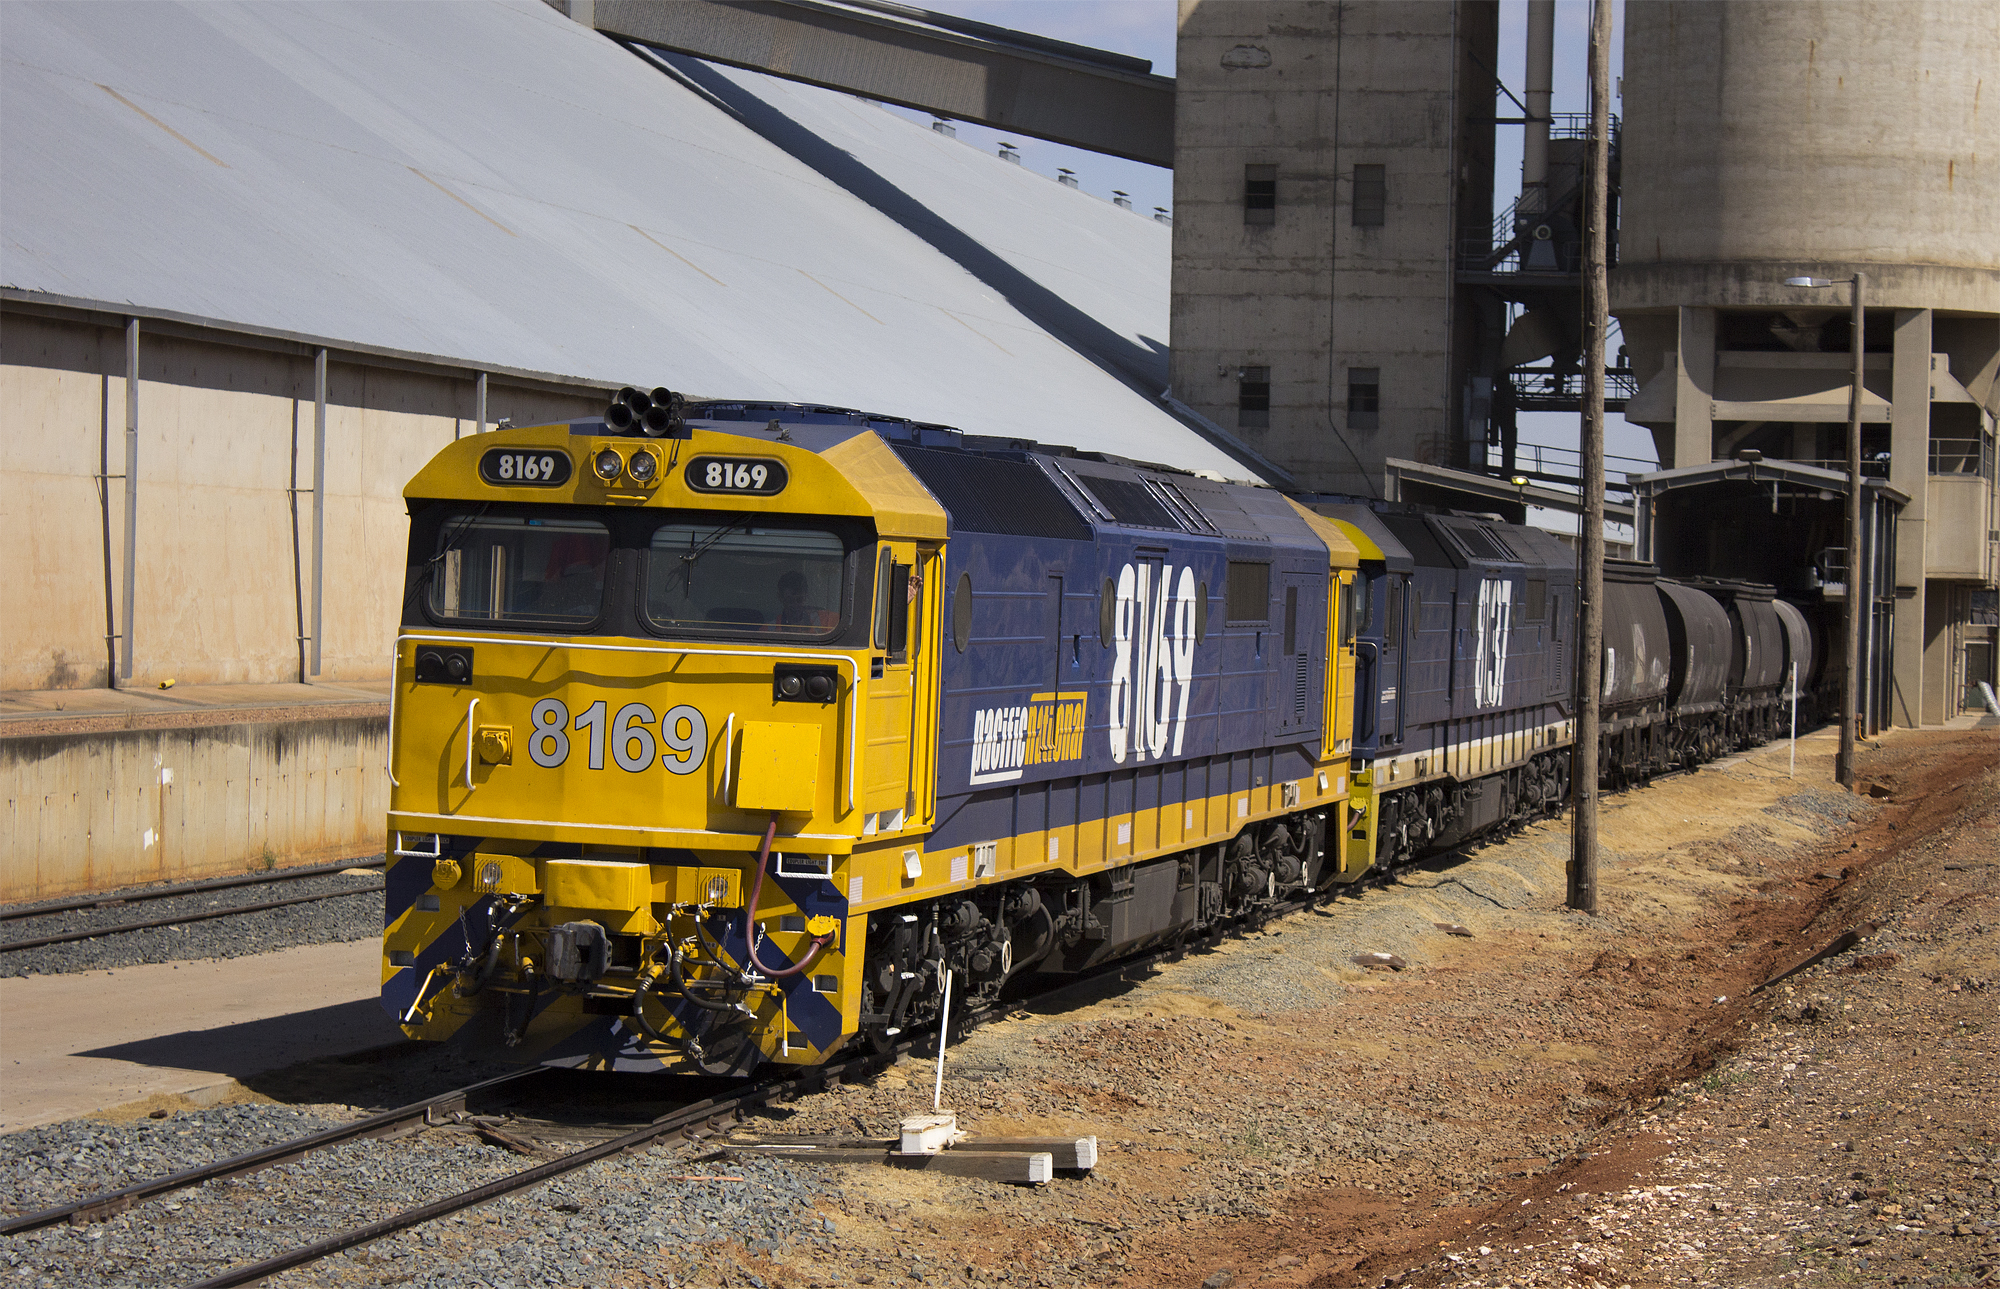 Pacific_National_81_class_locos_(8169_and_8137)_at_the_Temora_Sub_Terminal.jpg